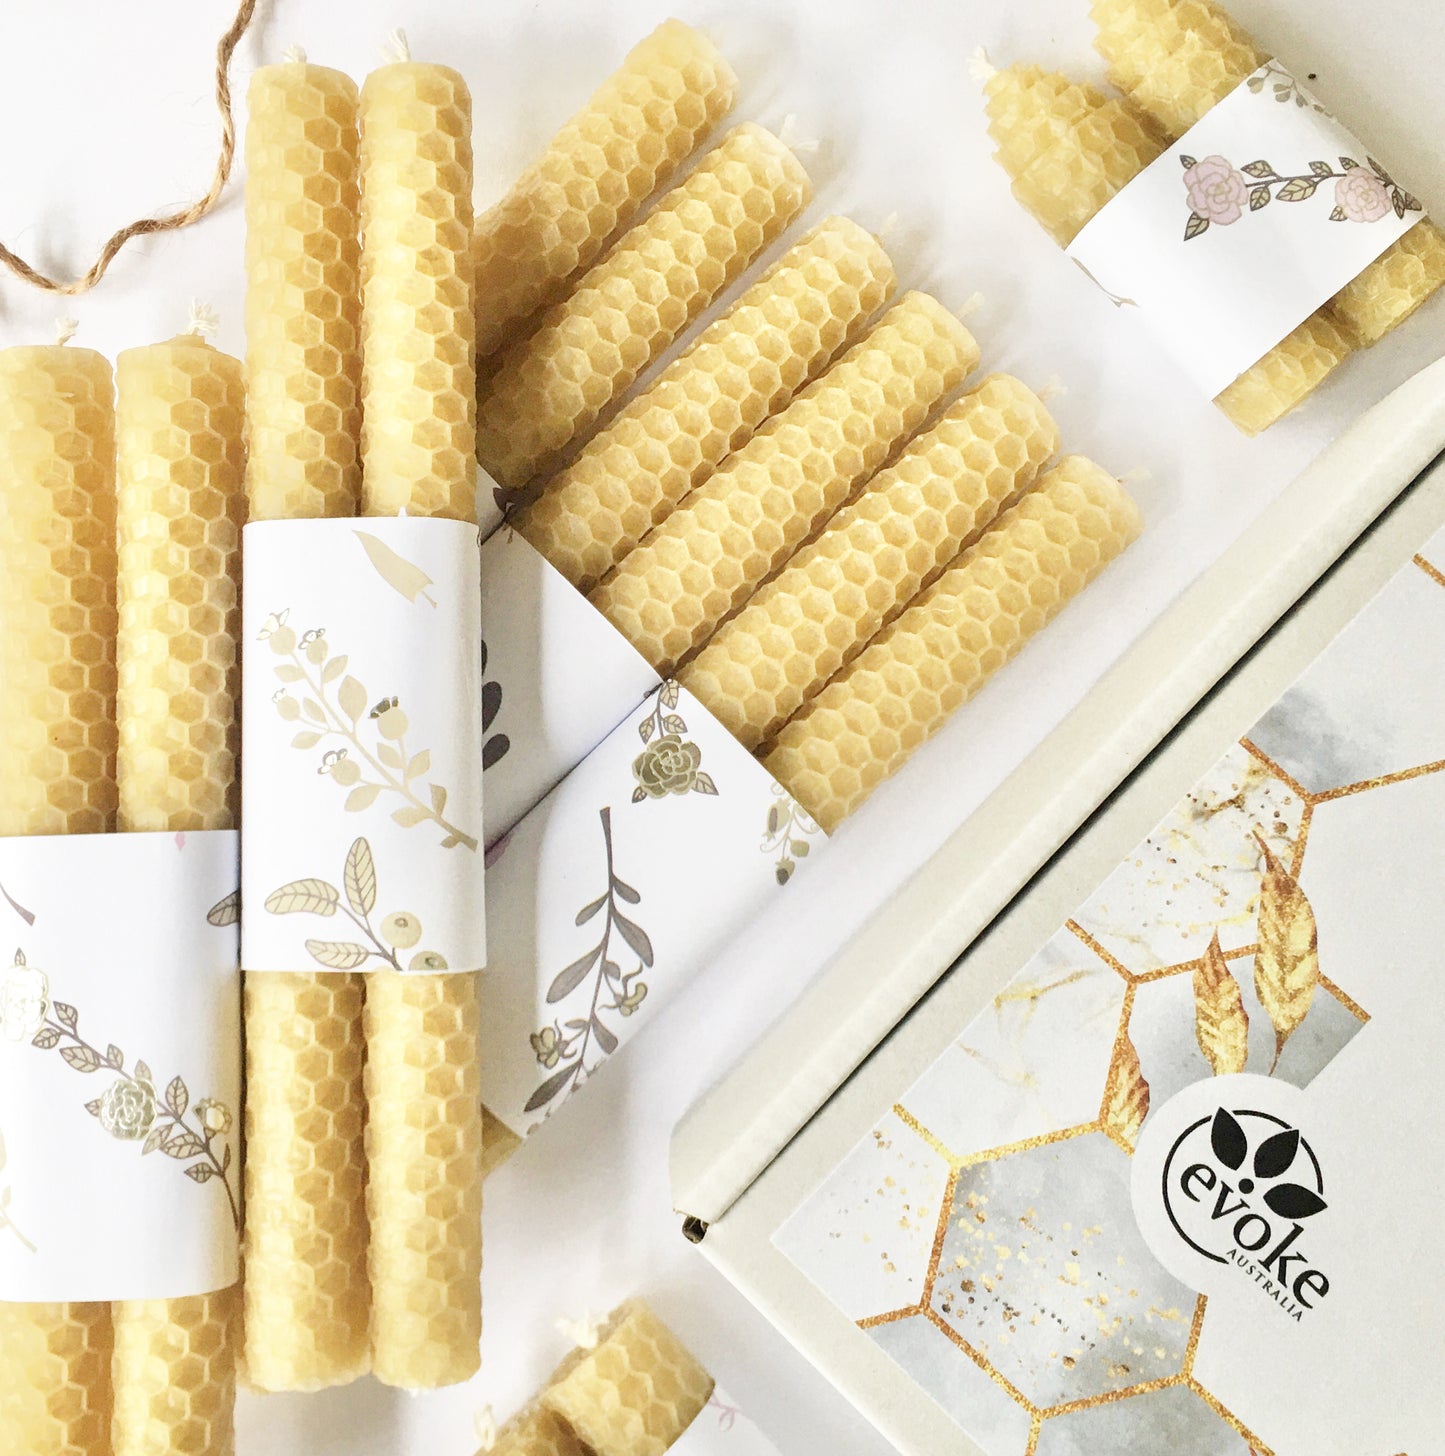 Beeswax candle making kit